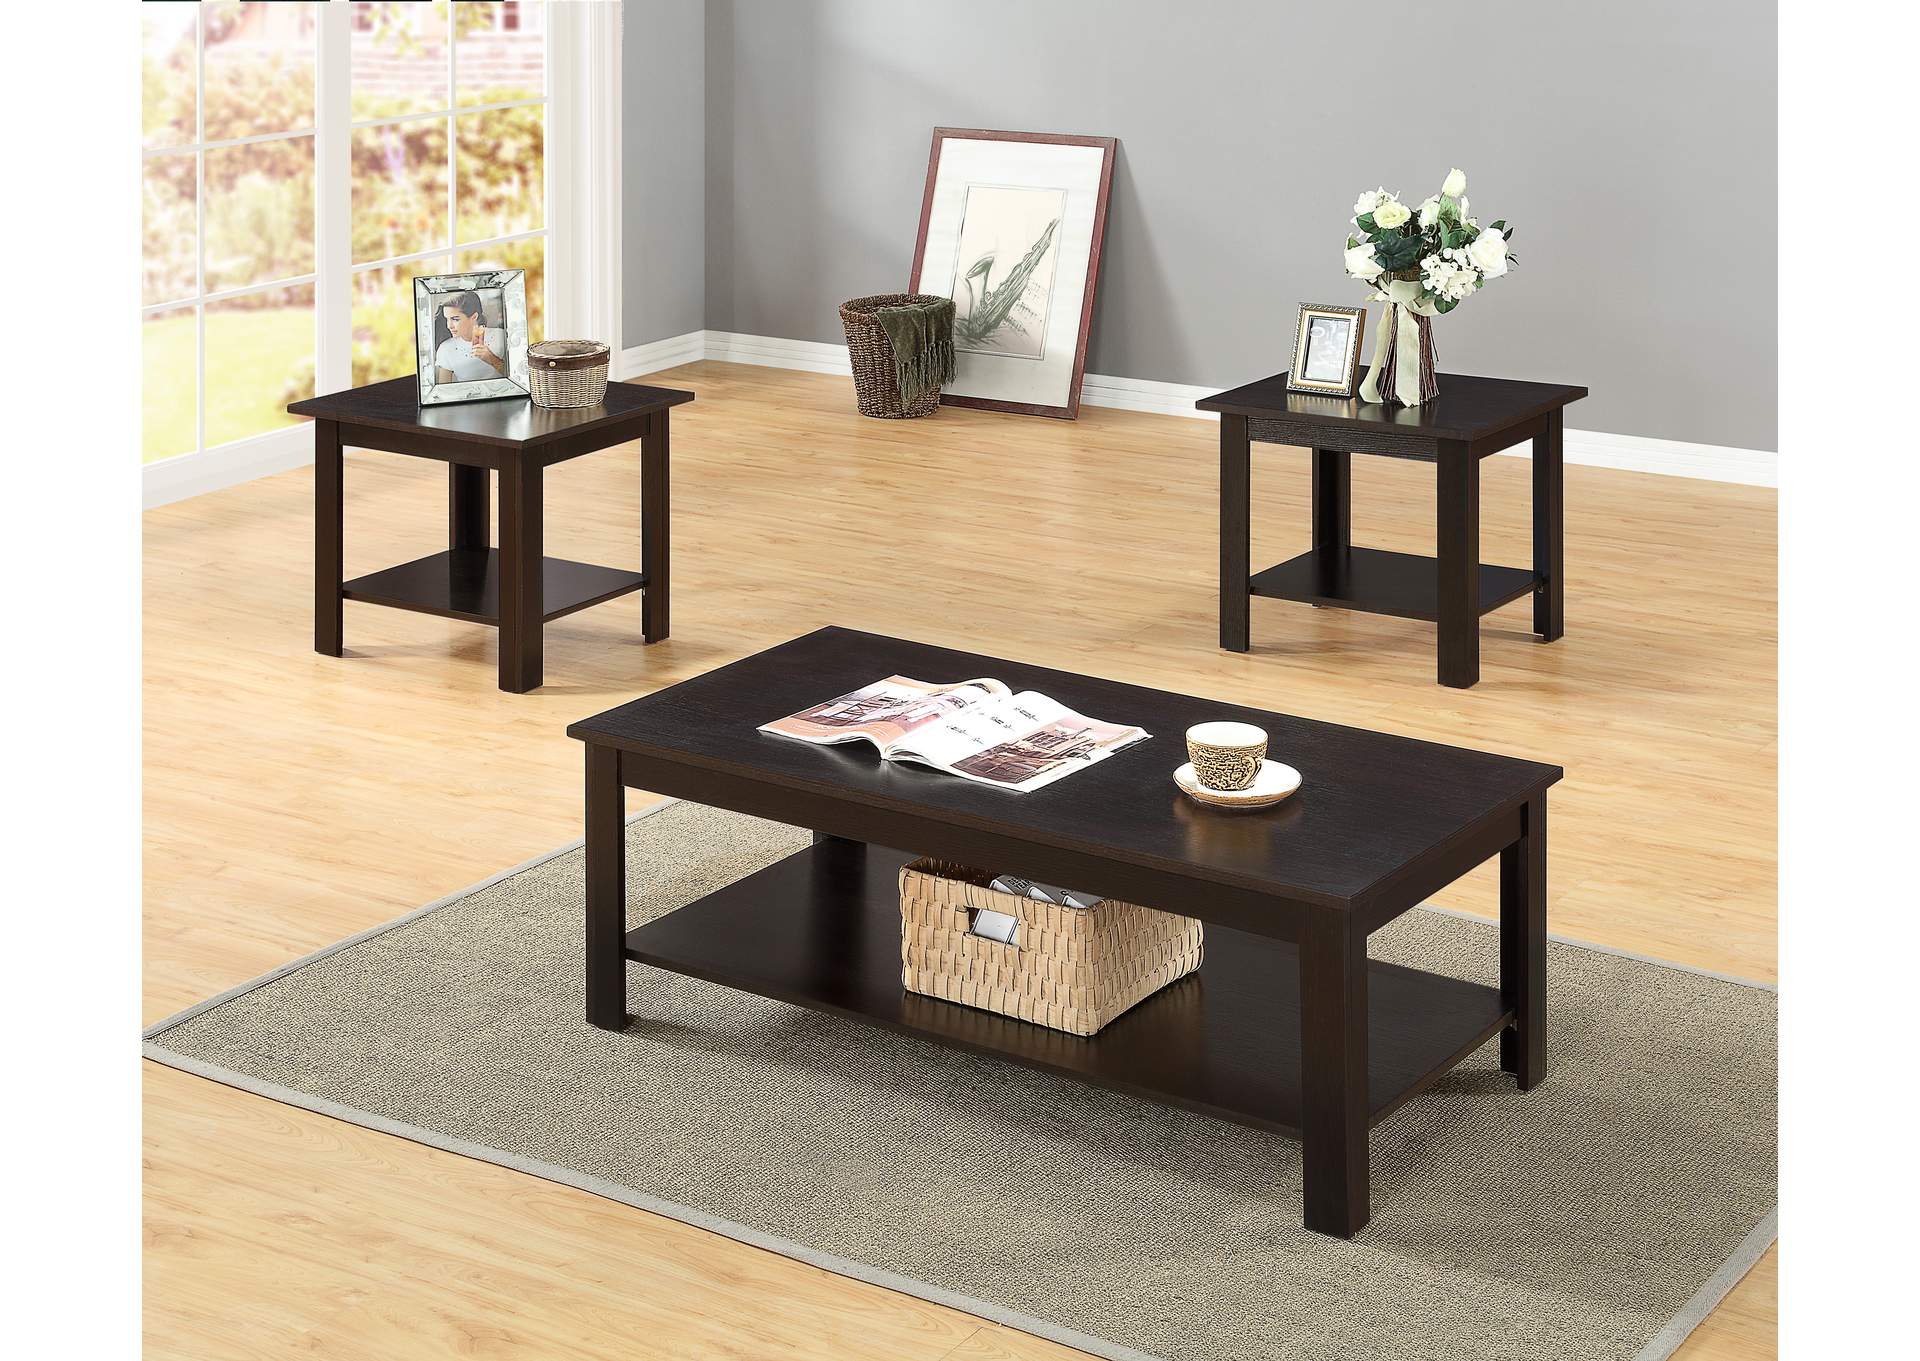 3316C 3 Piece Cappuccino Coffee And End Table Set,Global Trading